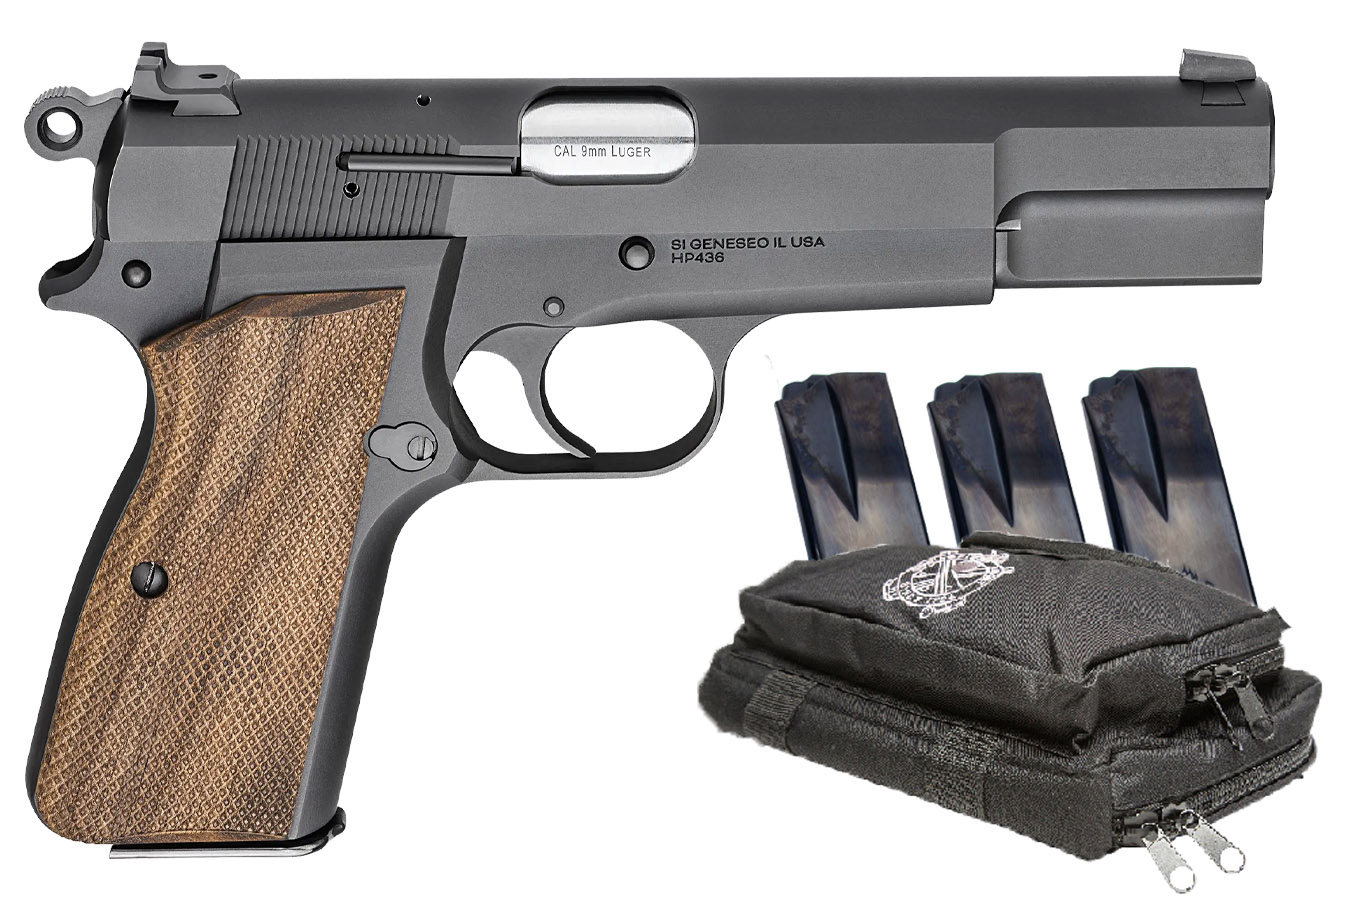 No. 23 Best Selling: SPRINGFIELD SA-35 9MM 4.7 IN BBL 15 RD MAG 4 MAGS / RANGE BAG